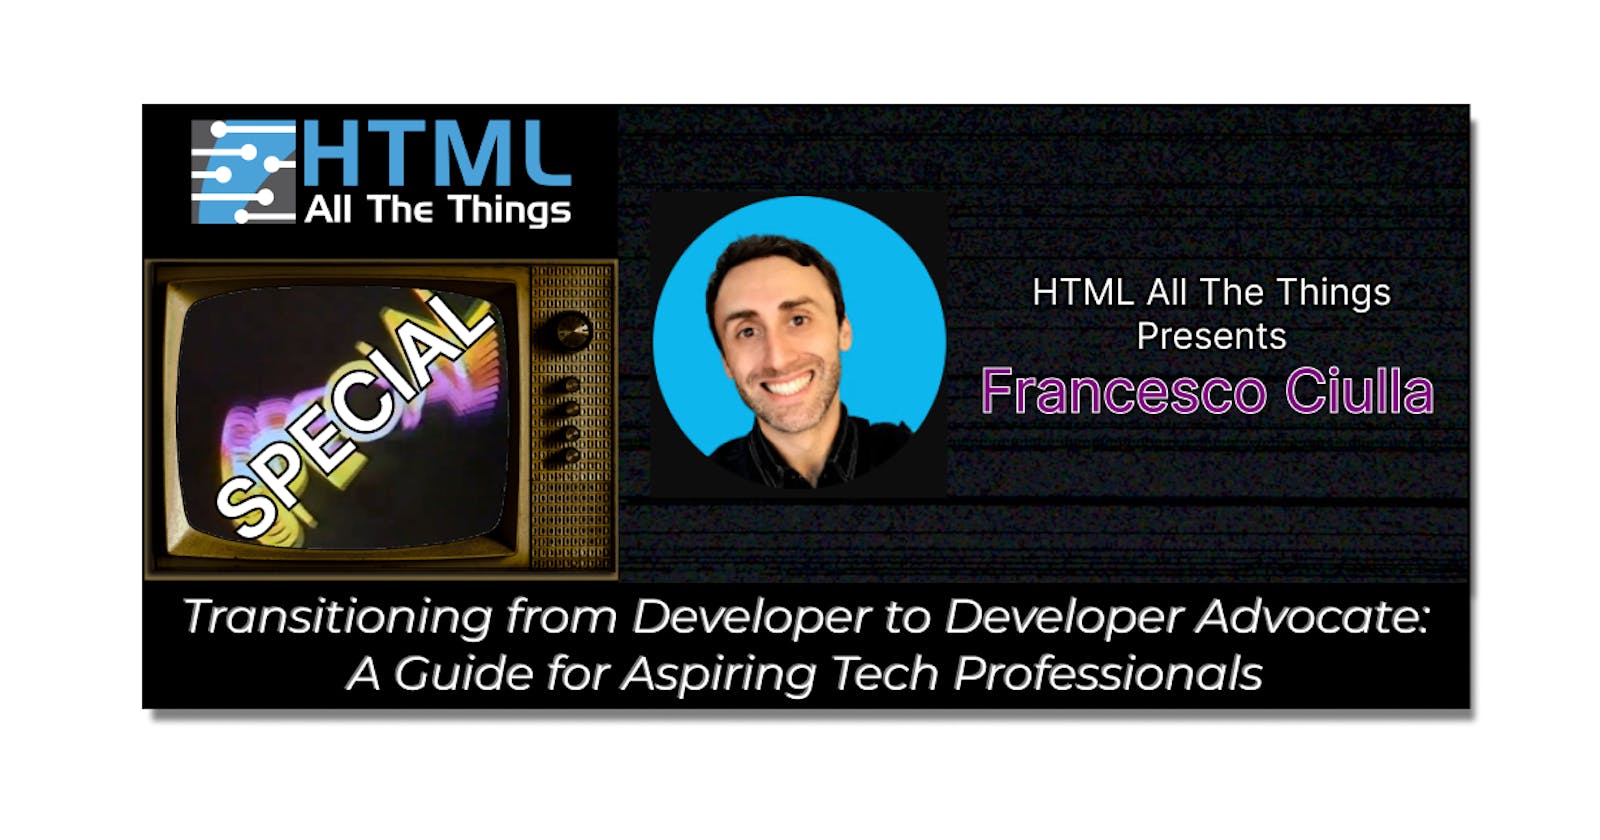 Transitioning from Developer to Developer Advocate: A Guide for Aspiring Tech Professionals